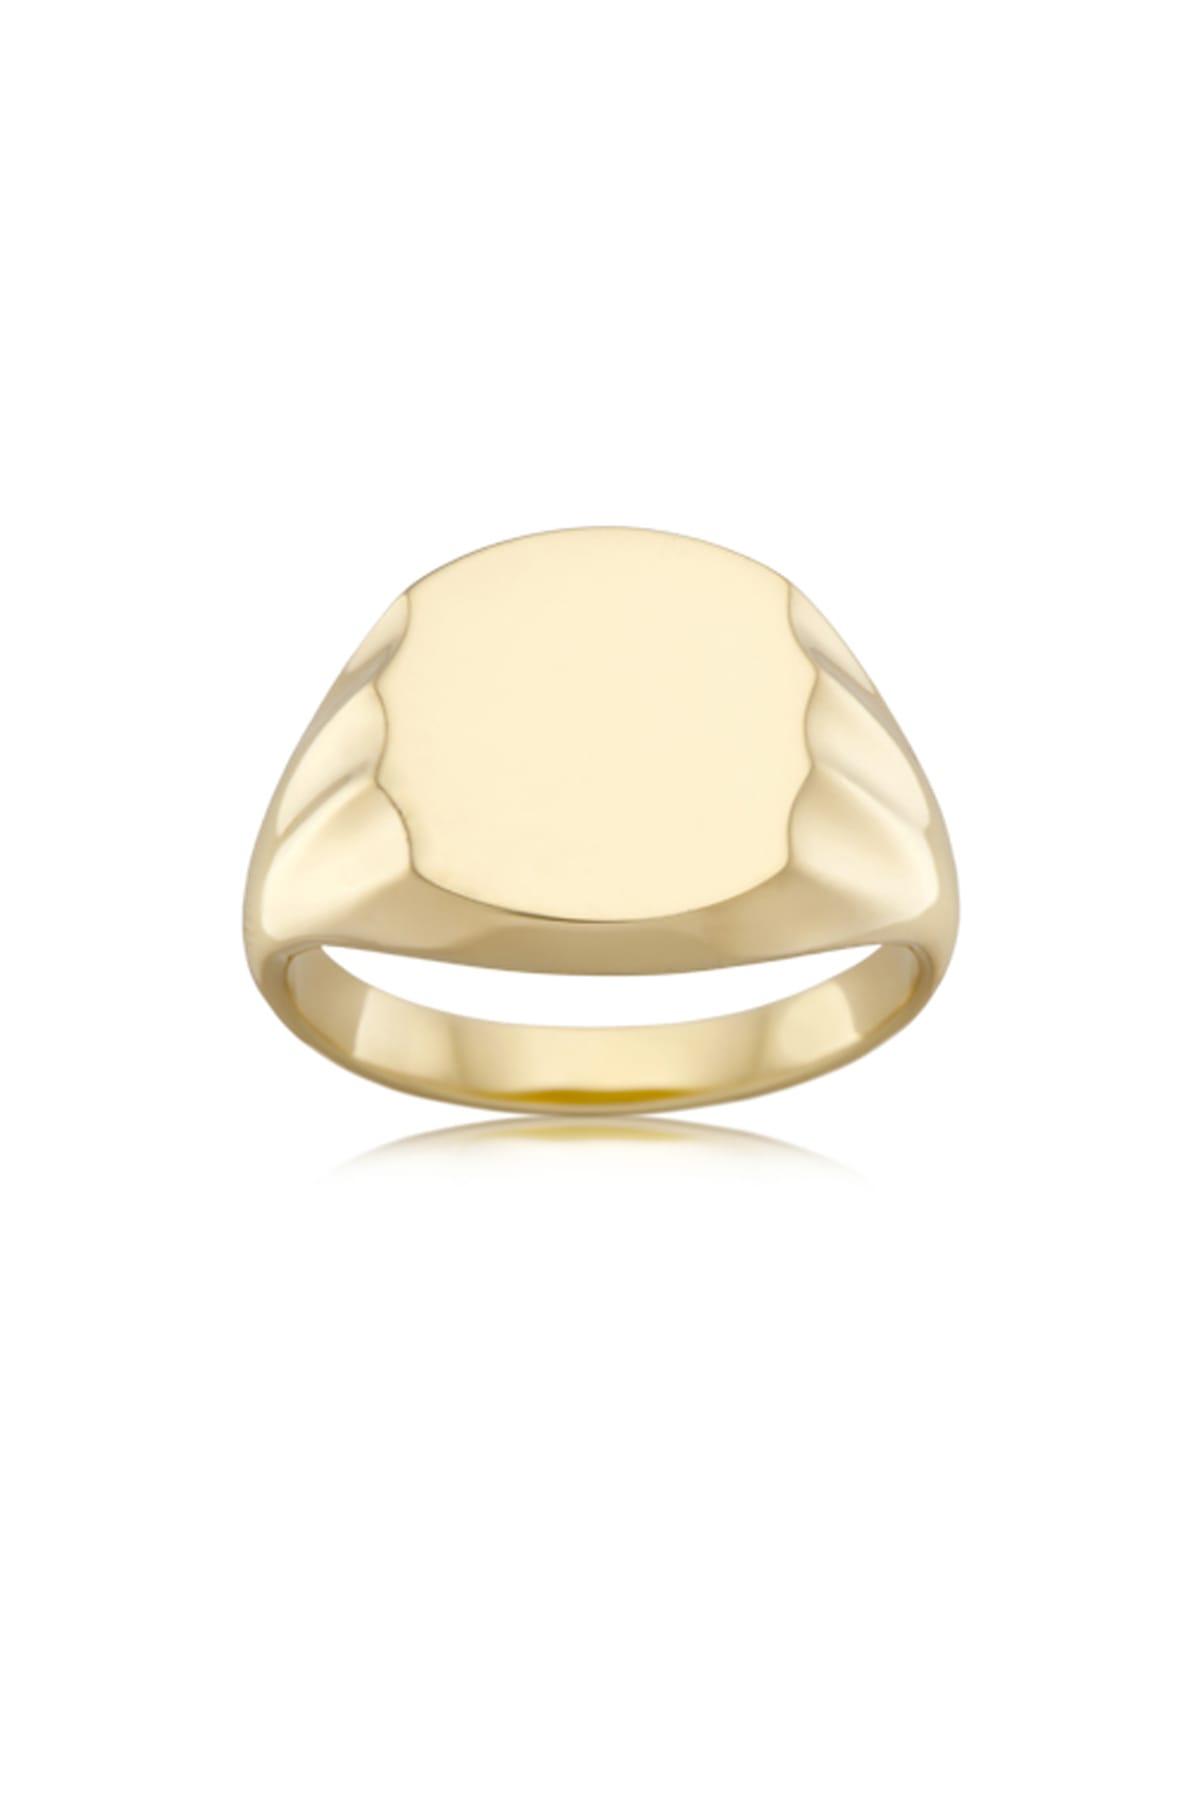 Wide Shield Shaped Flat Top Signet Ring available at LeGassick Diamonds and Jewellery Gold Coast, Australia.